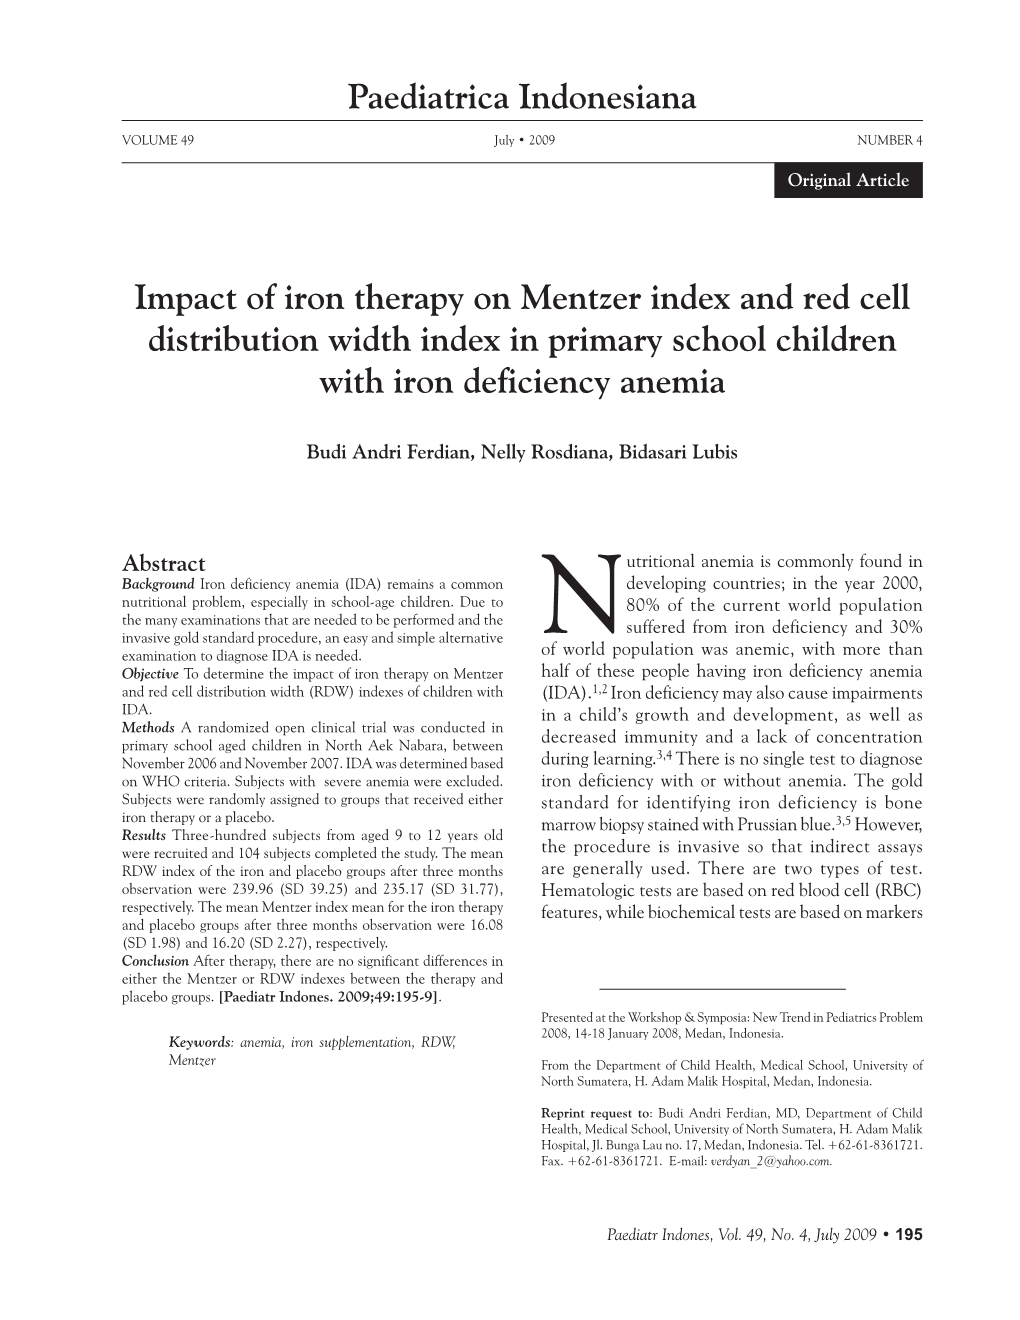 Paediatrica Indonesiana Impact of Iron Therapy on Mentzer Index and Red Cell Distribution Width Index in Primary School Children